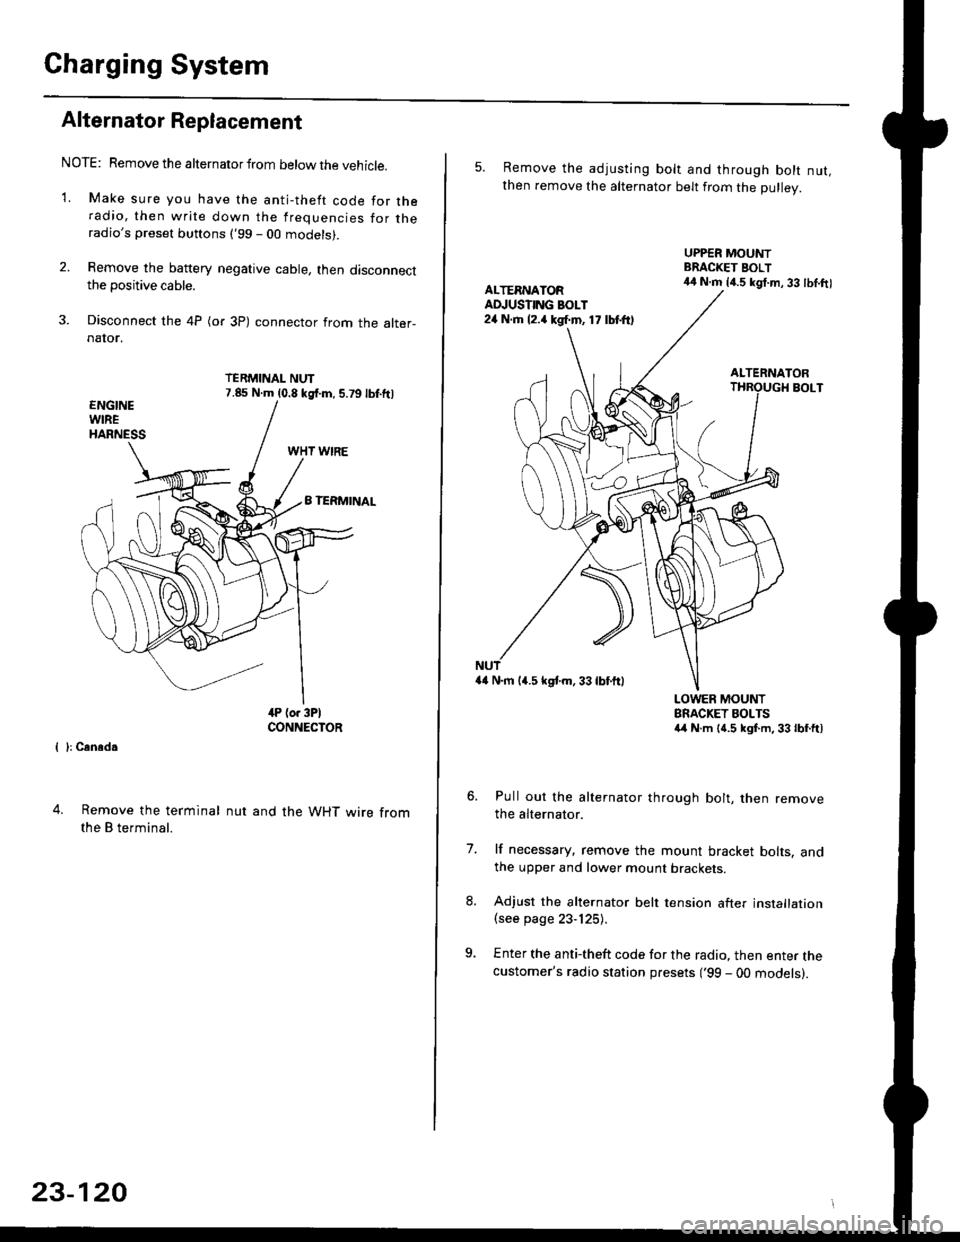 HONDA CIVIC 1998 6.G Workshop Manual Charging System
Alternator Replacement
NOTE: Remove the alternator from below the vehicle.
1. Make sure you have the anti-theft code for theradio, then write down the frequencies for theradios prese